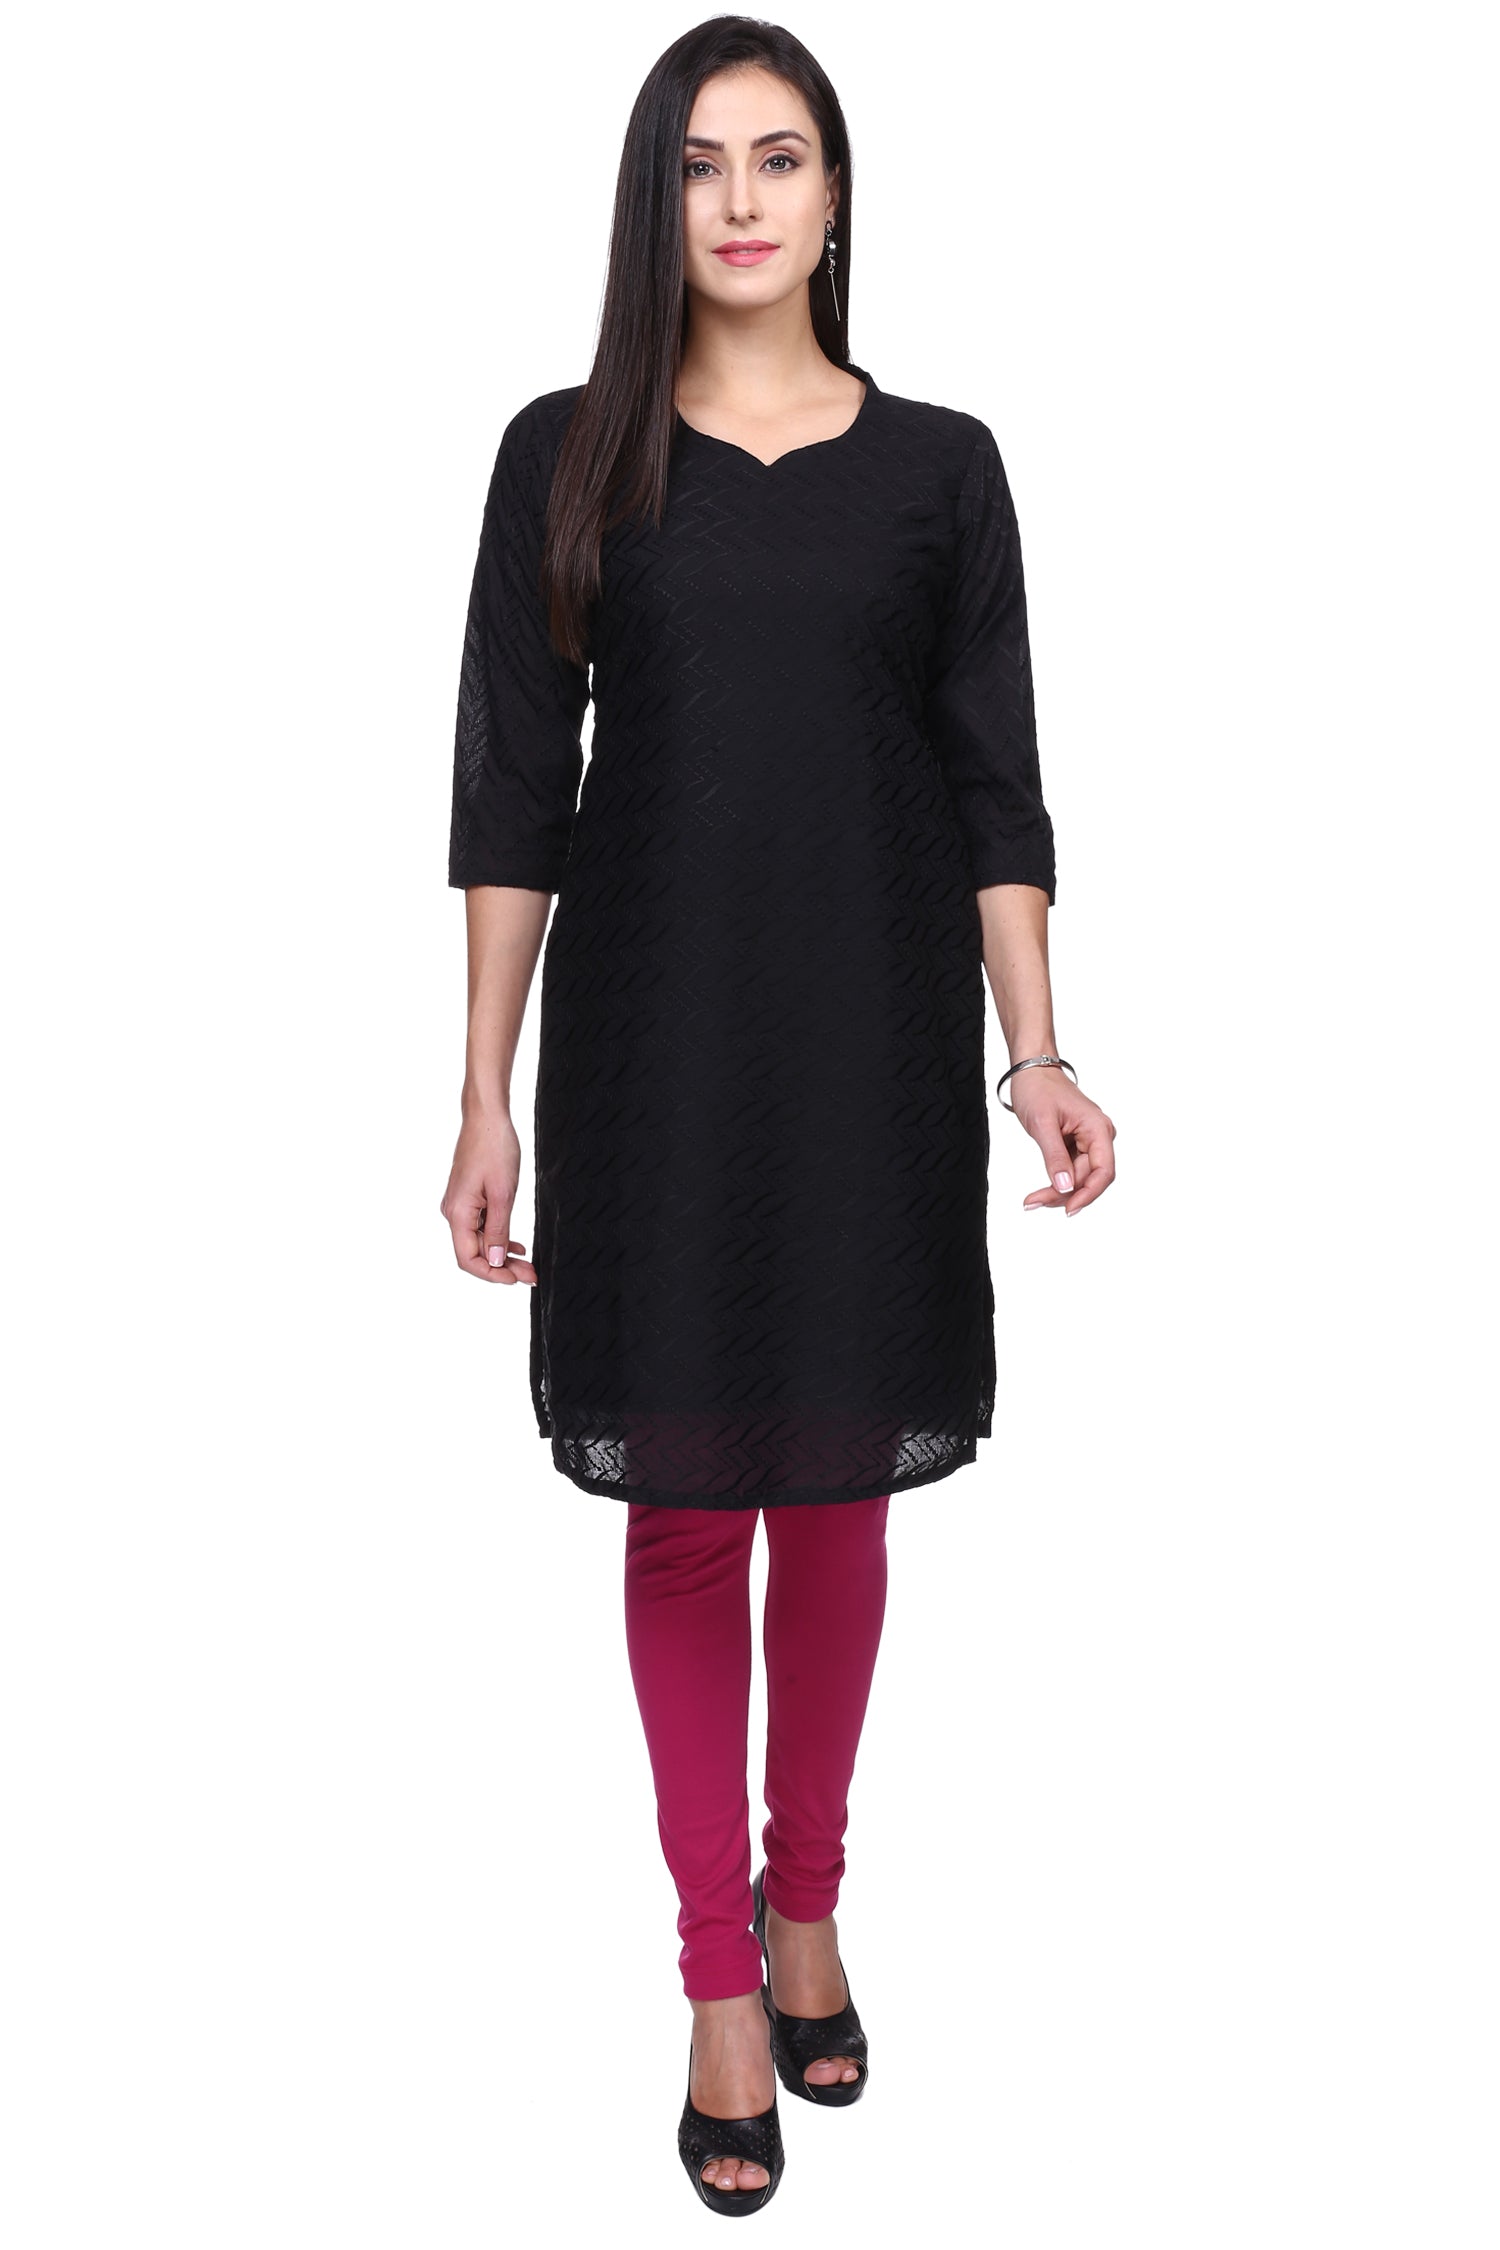 TRASA Kurti Pants for womens and girls super comfy stretchable cotton –